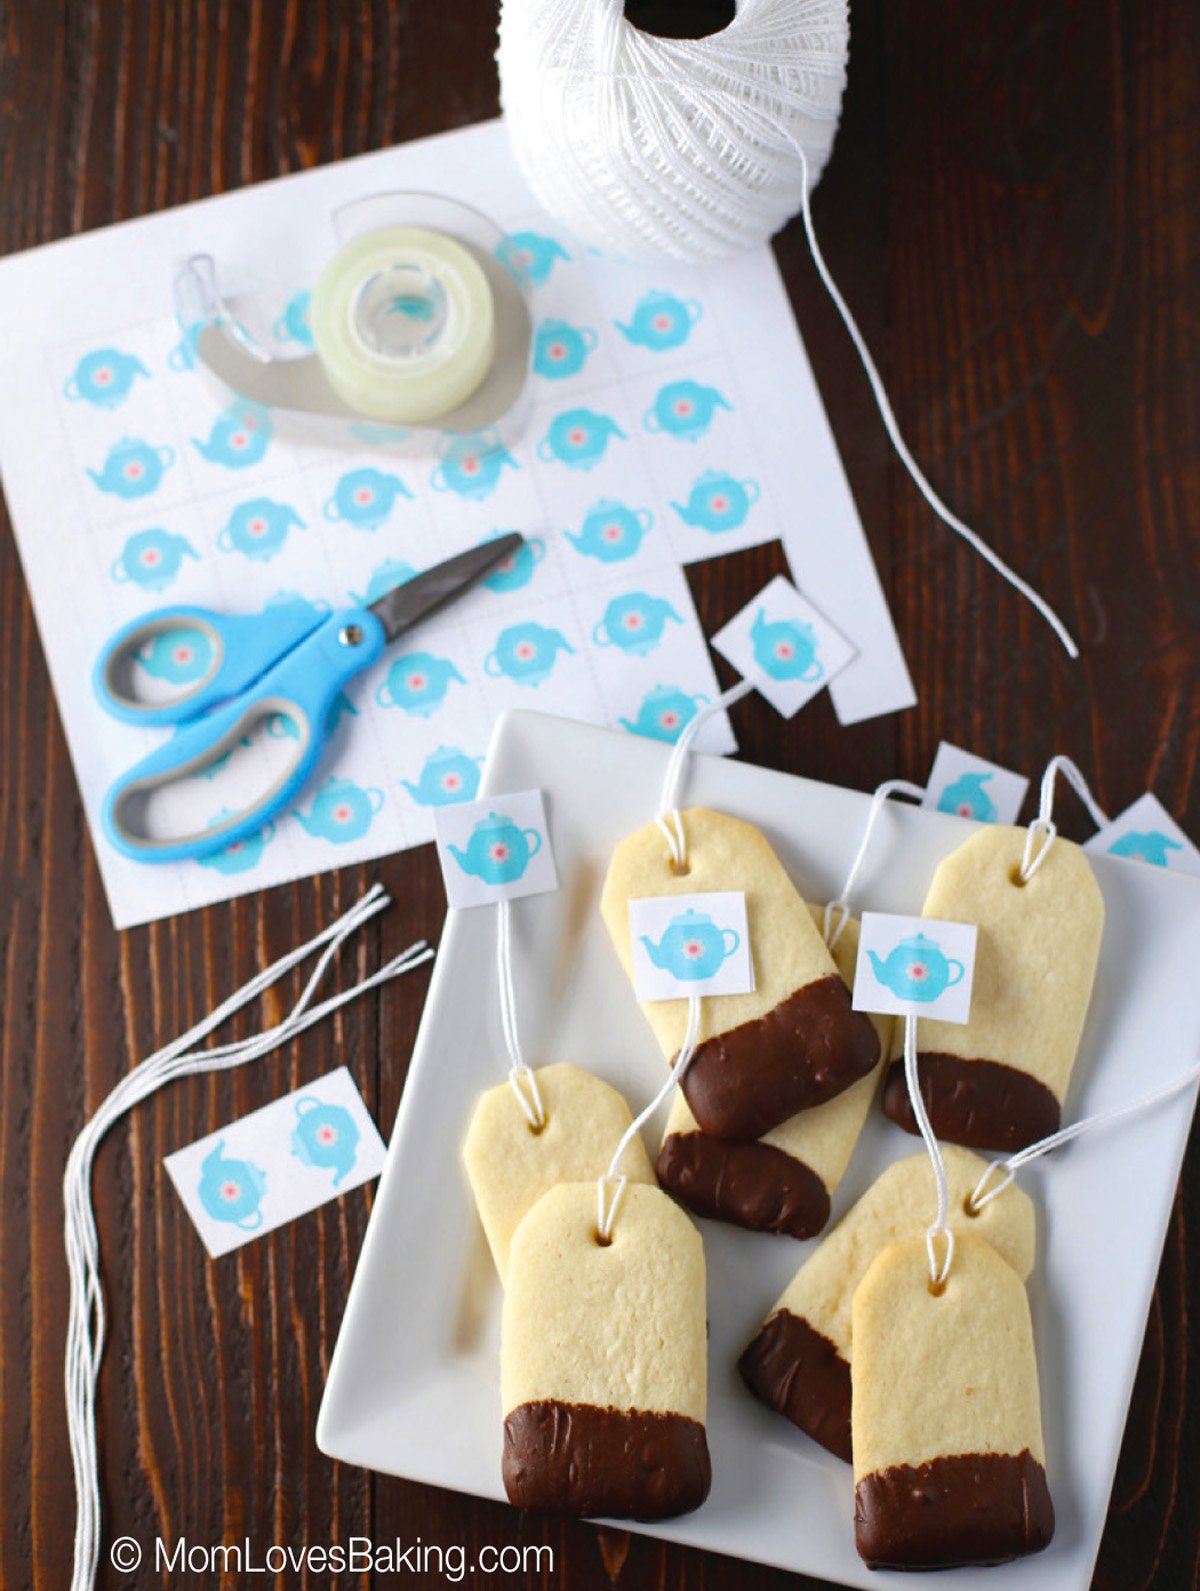 Teabag cookie printable tag to add to baked cookies.